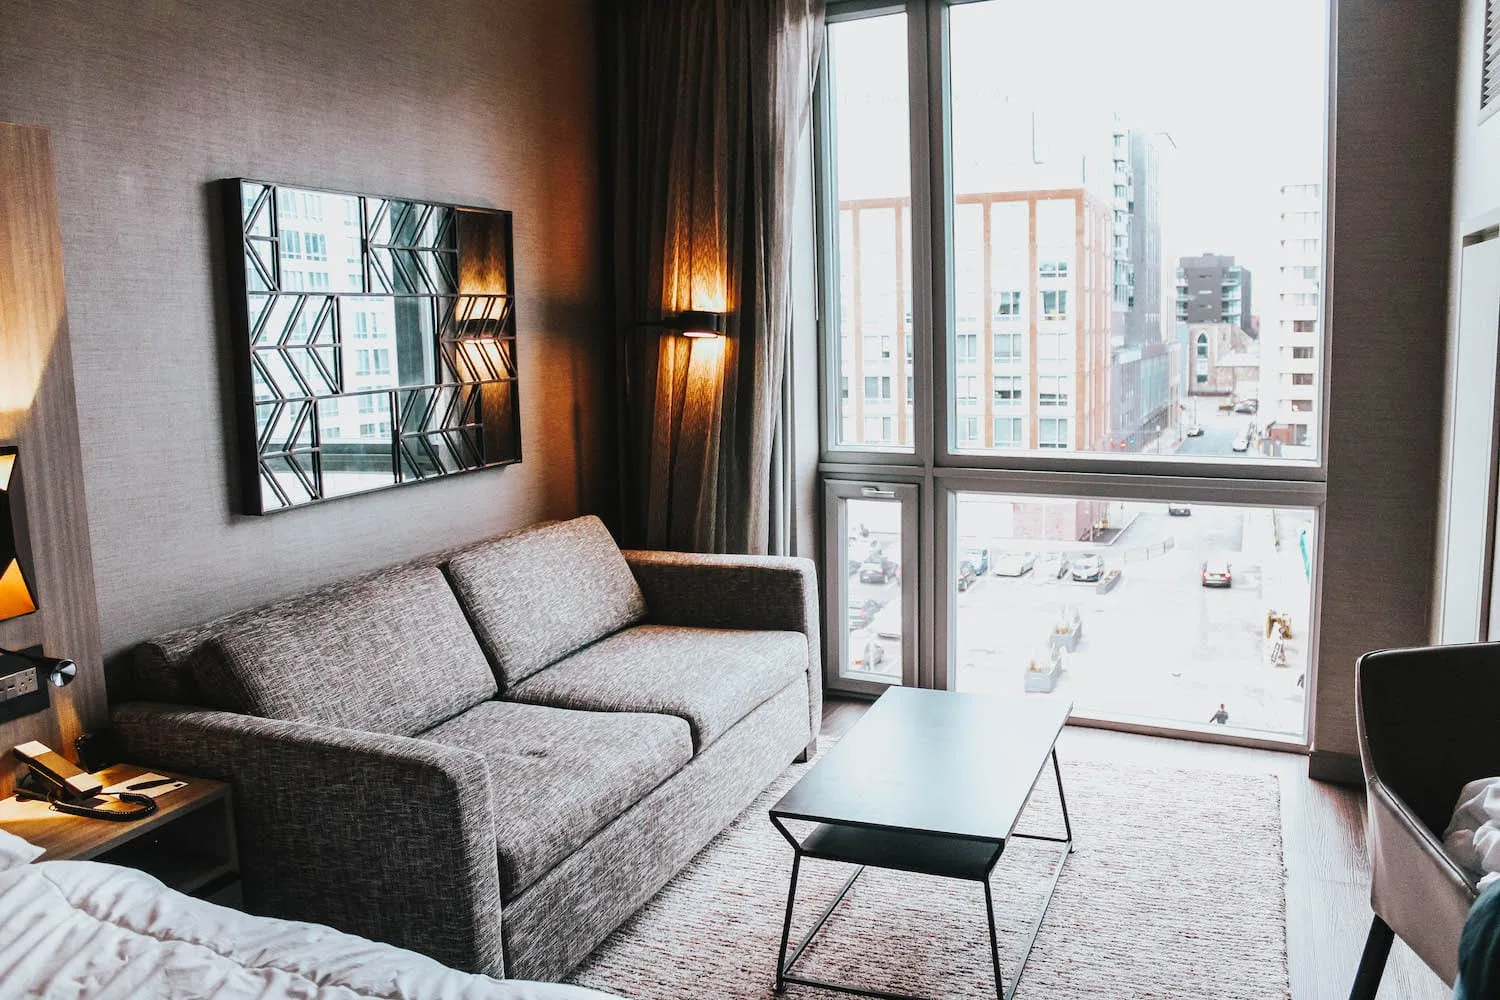 Where to Stay in Boston